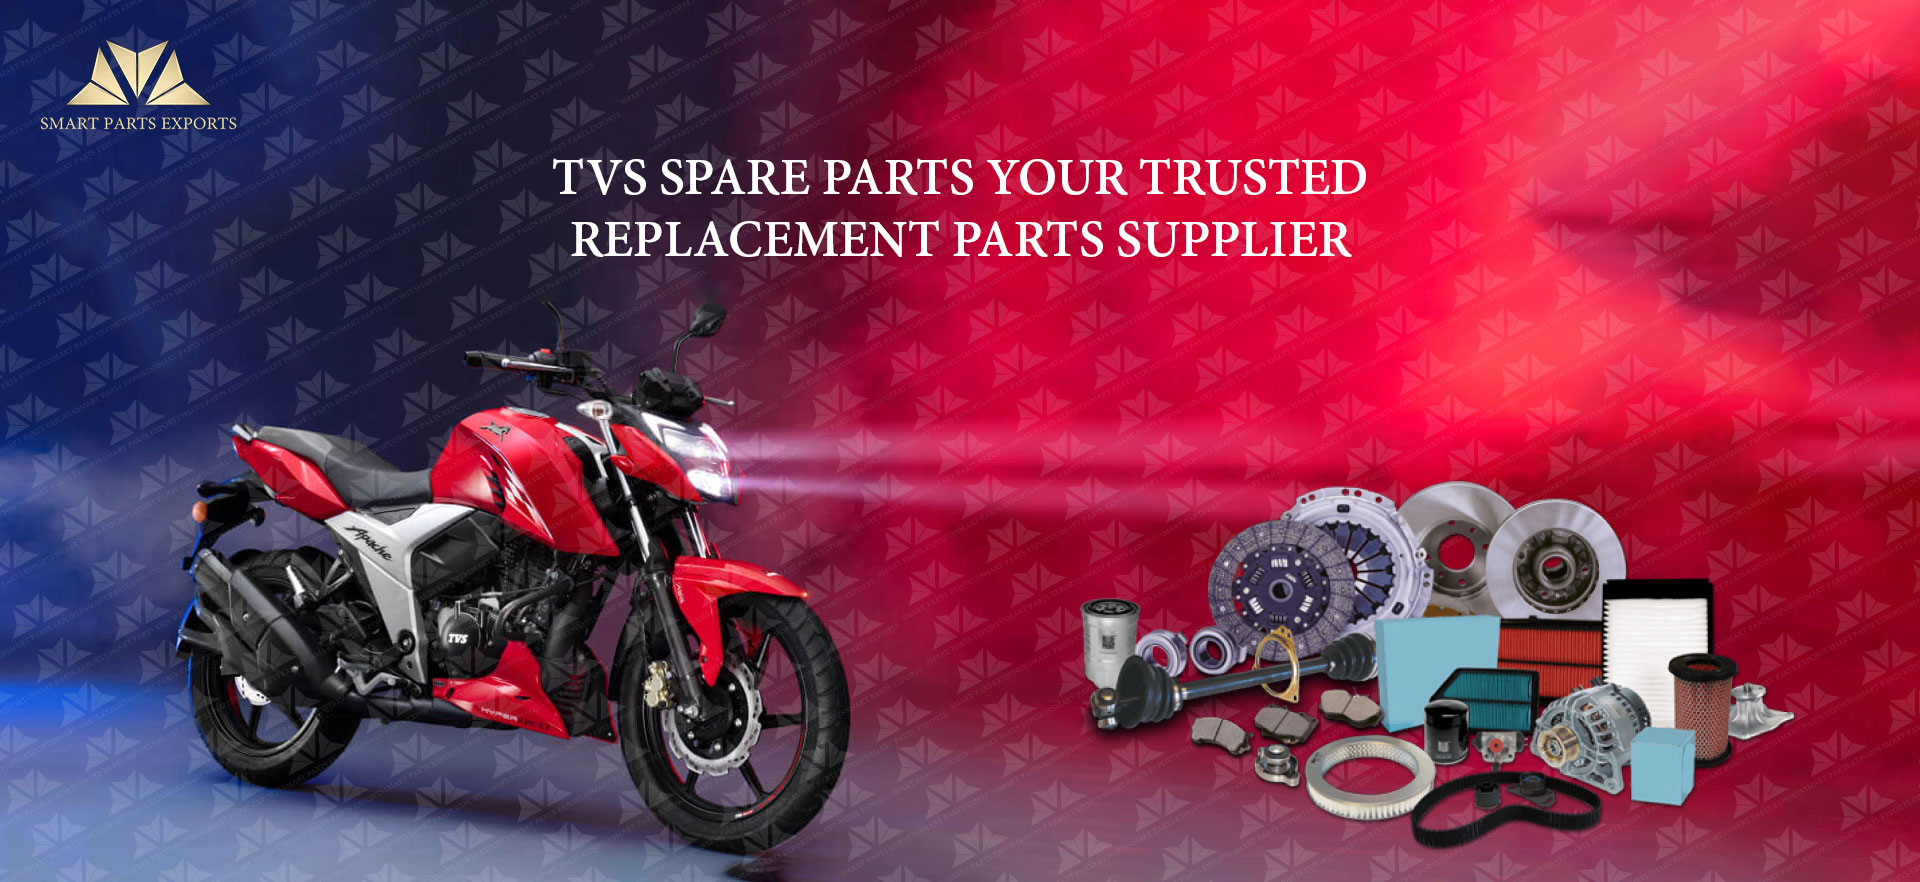 TVS Spare Parts: Your Trusted Replacement Parts Supplier